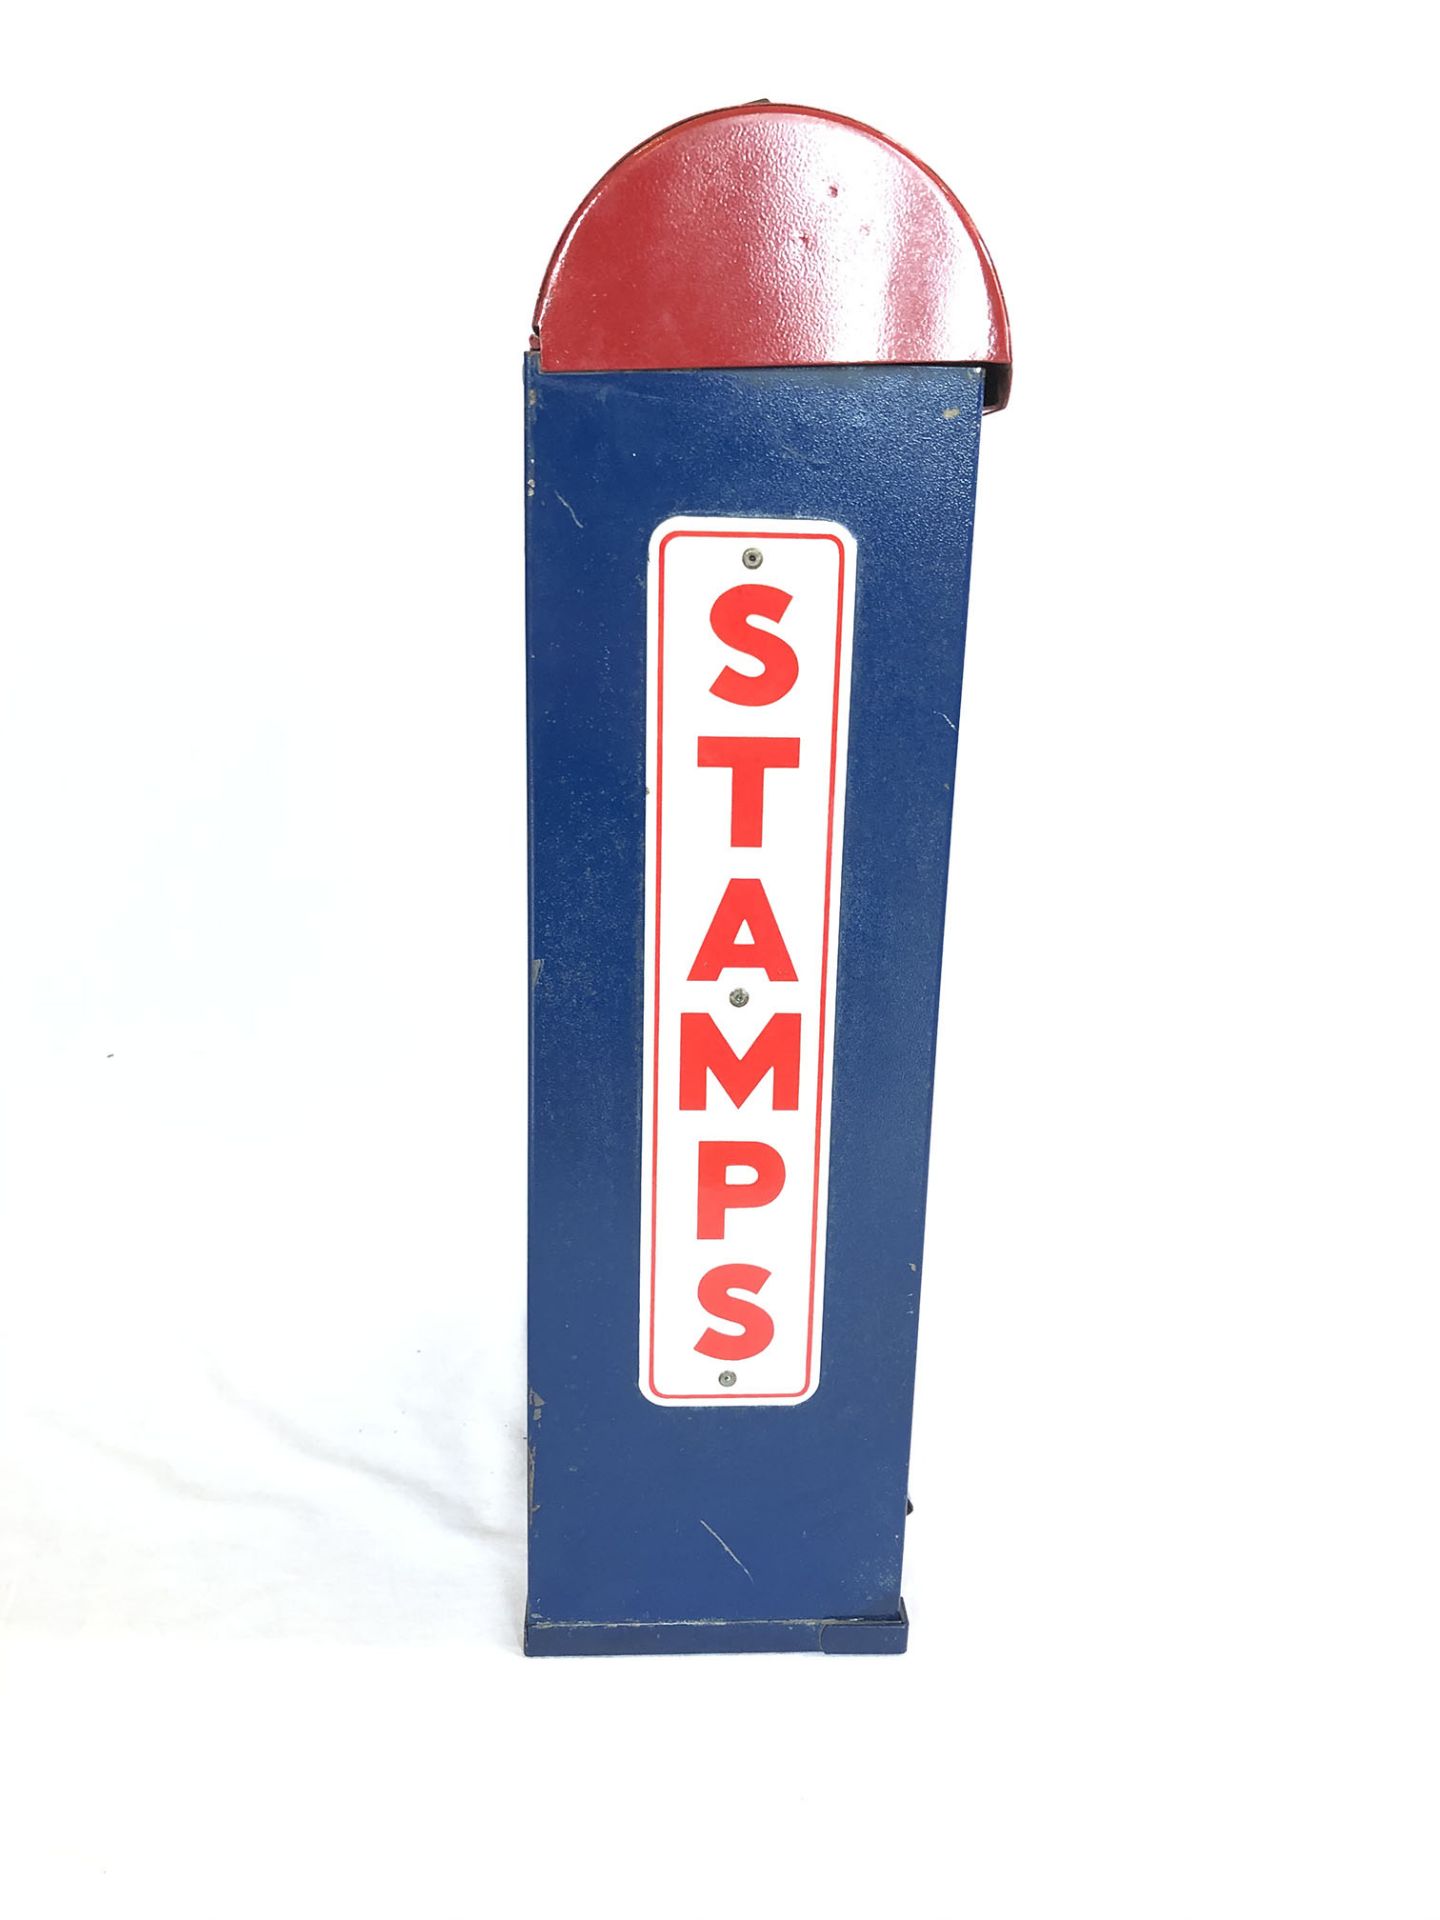 Postage stamp vending machine from the U.S.A - Image 3 of 8